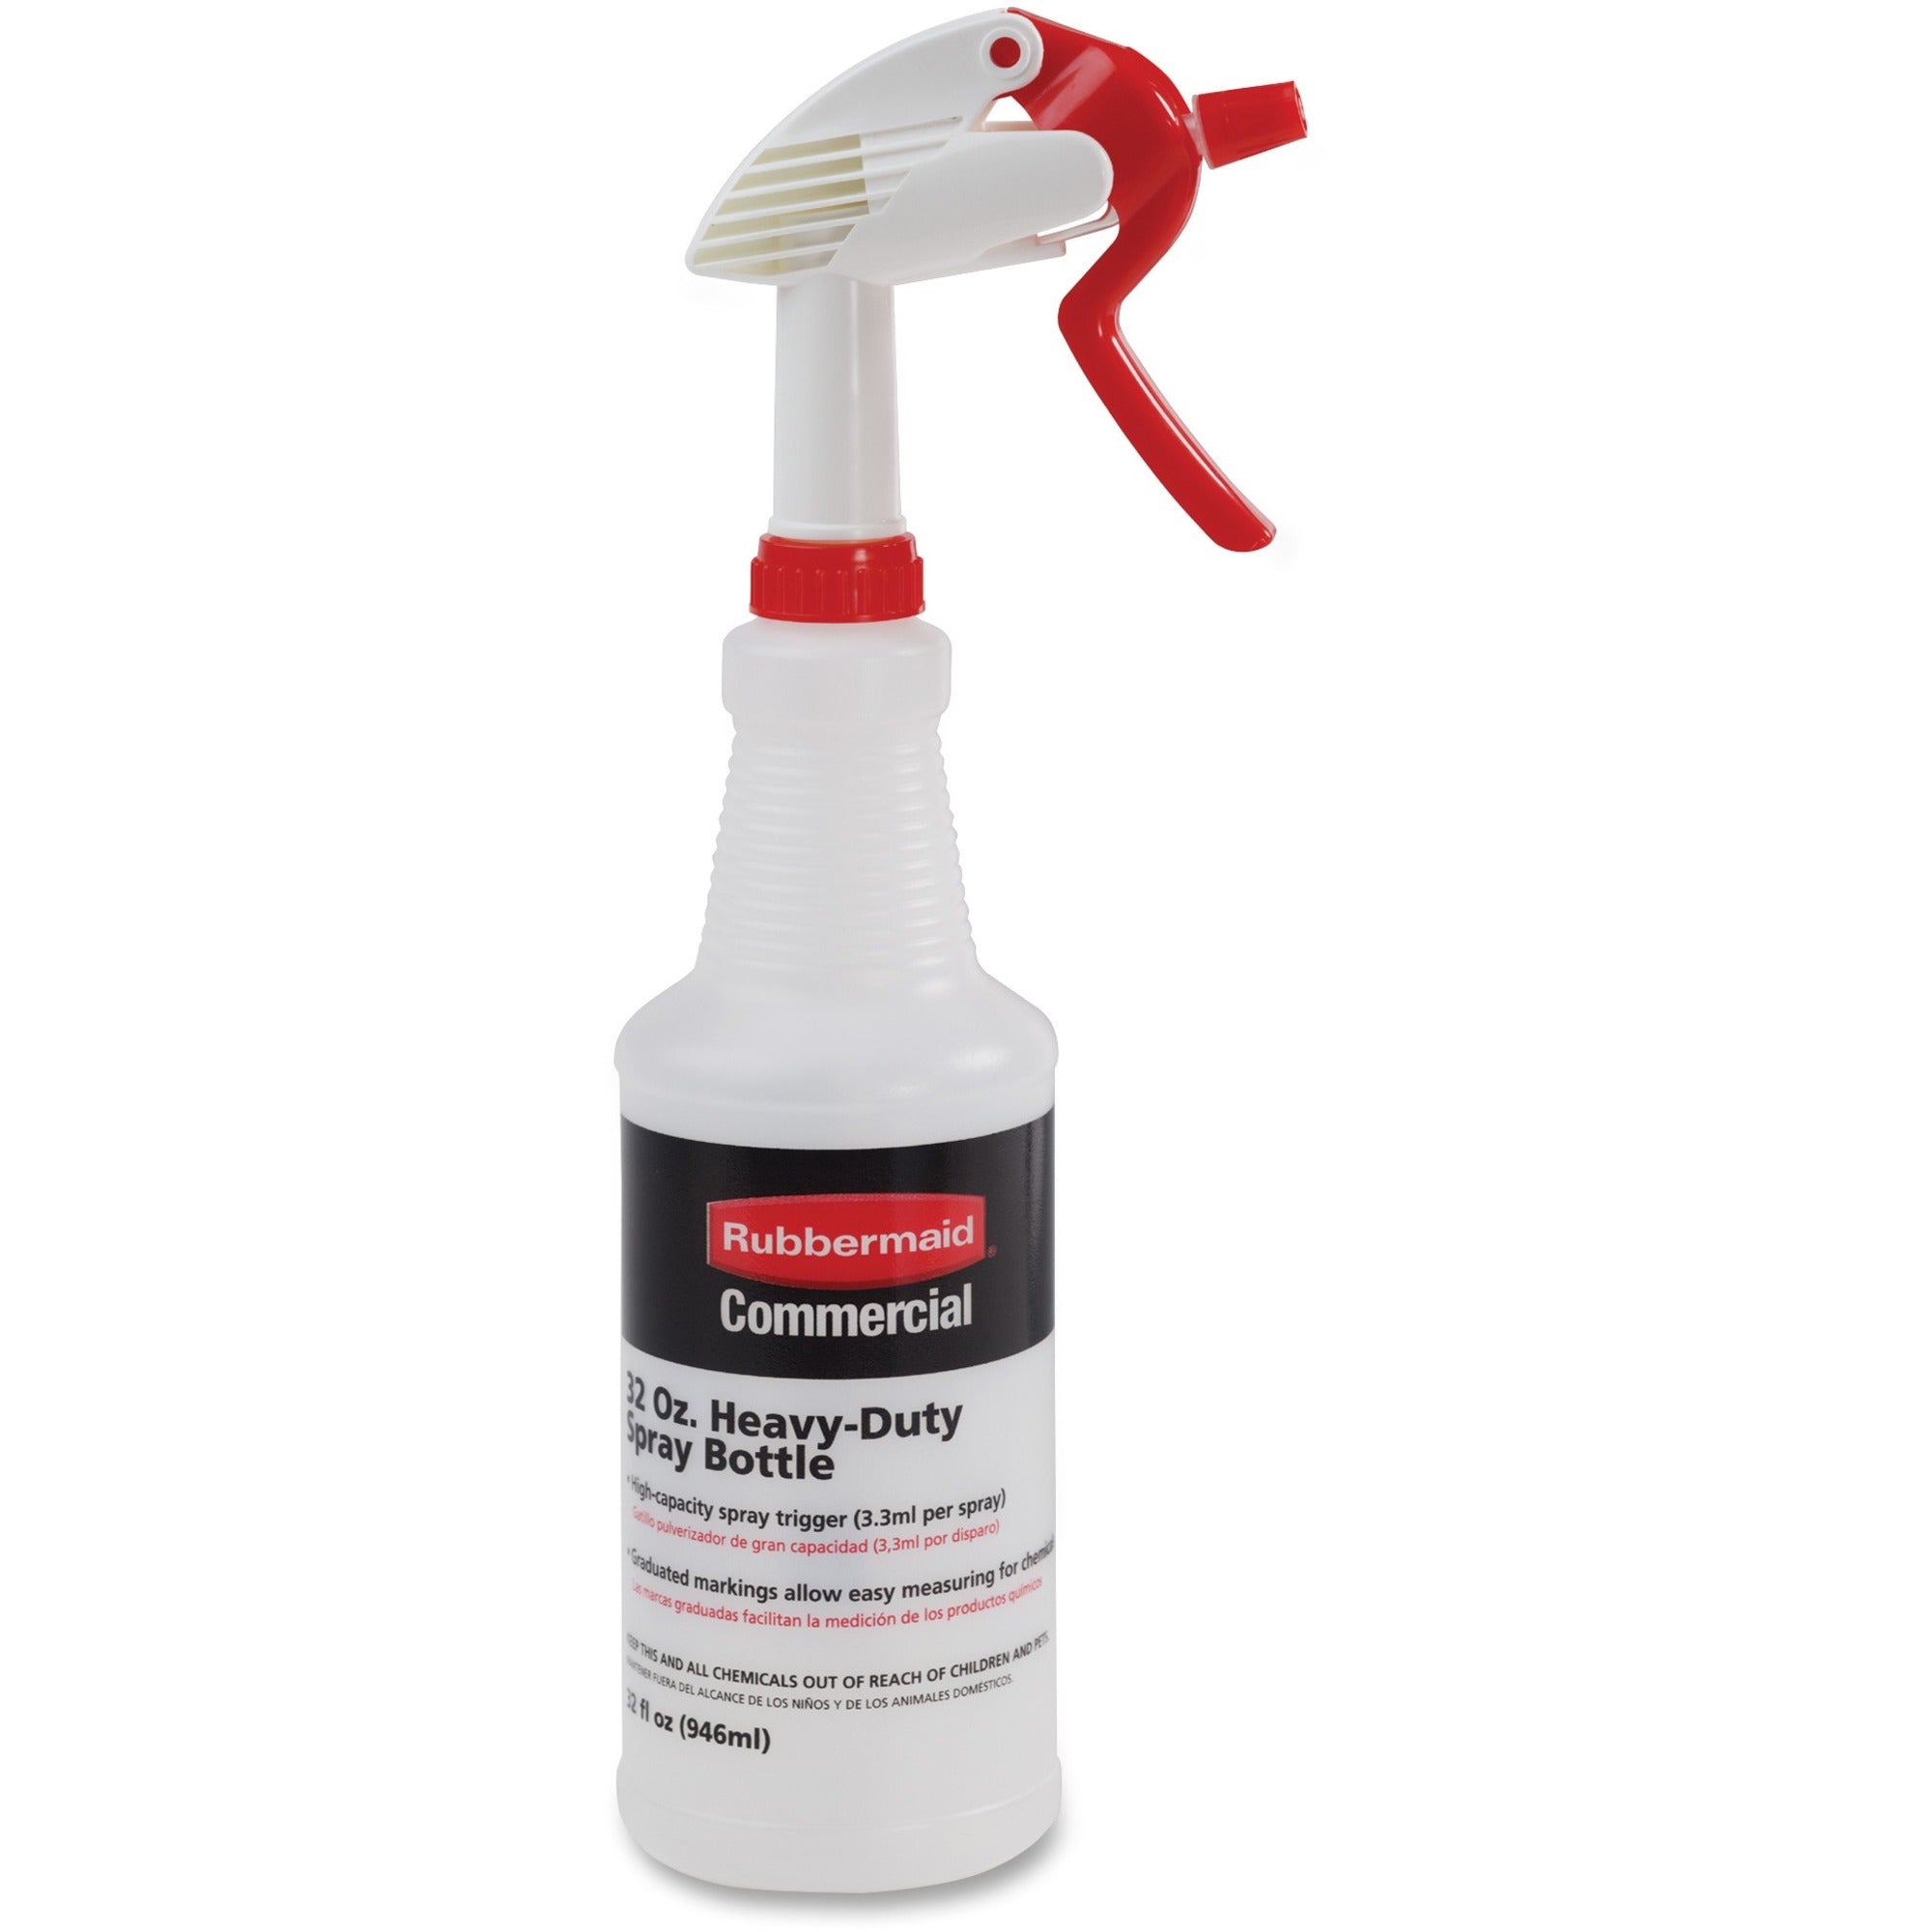 rubbermaid-commercial-32-oz-trigger-spray-bottle-suitable-for-cleaning-heavy-duty-96-height-34-width-6-carton-clear_rcp9c03060000ct - 1